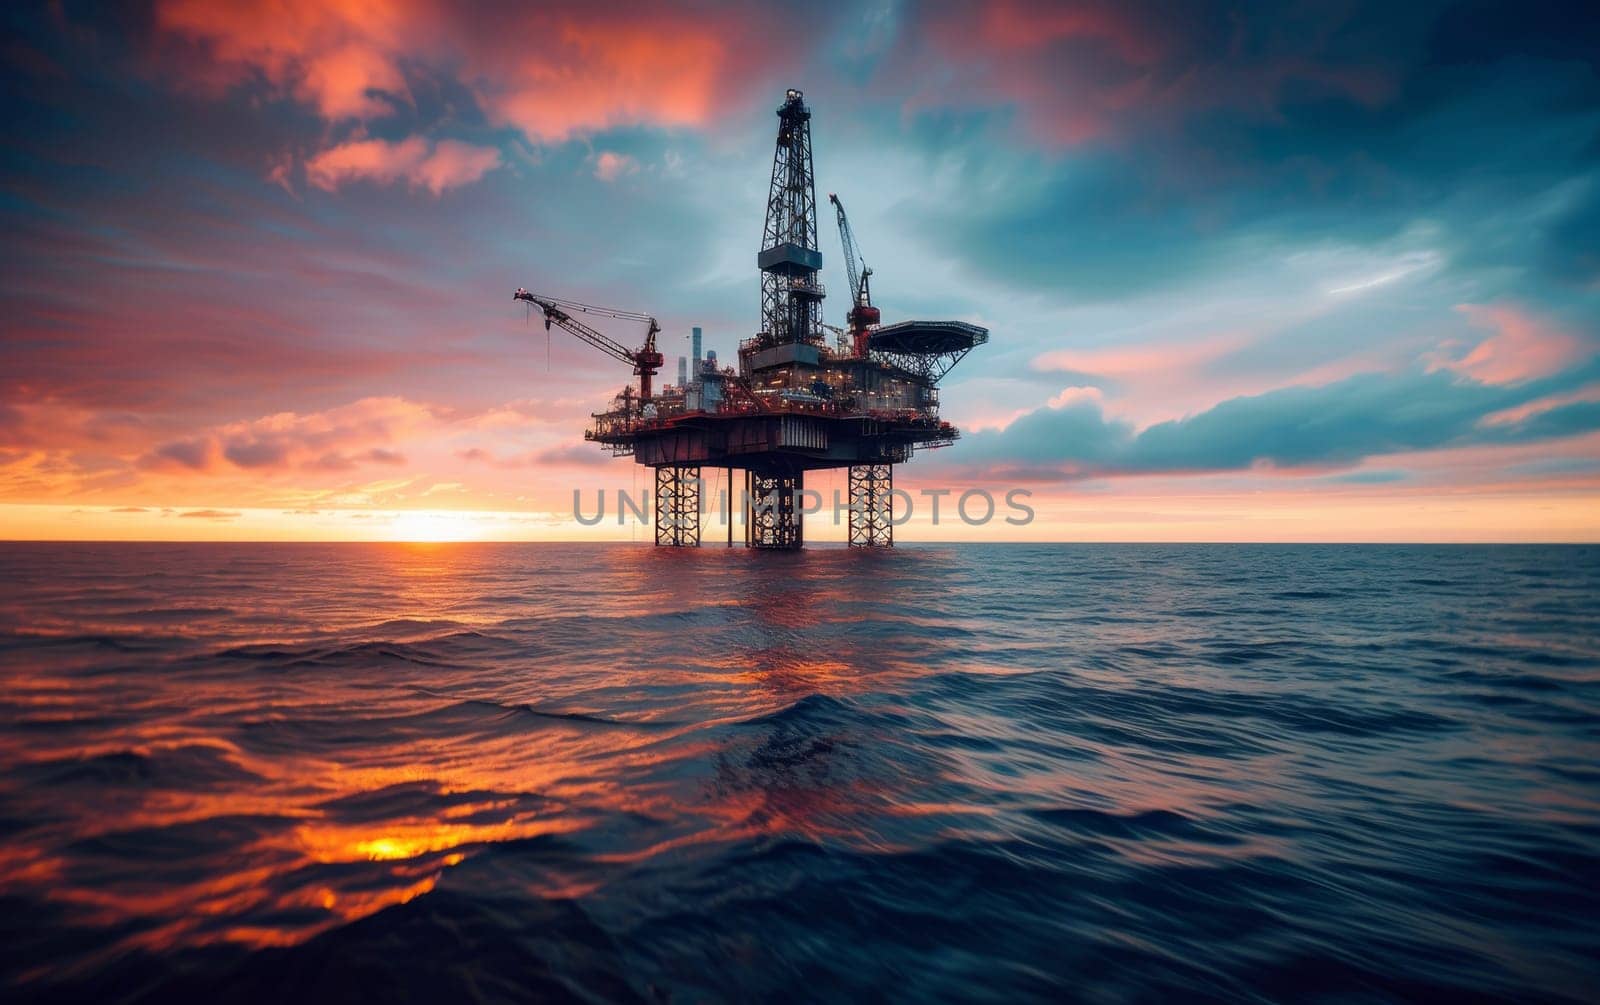 Majestic sunset silhouette of an offshore oil rig, with vibrant skies reflecting on the ocean surface